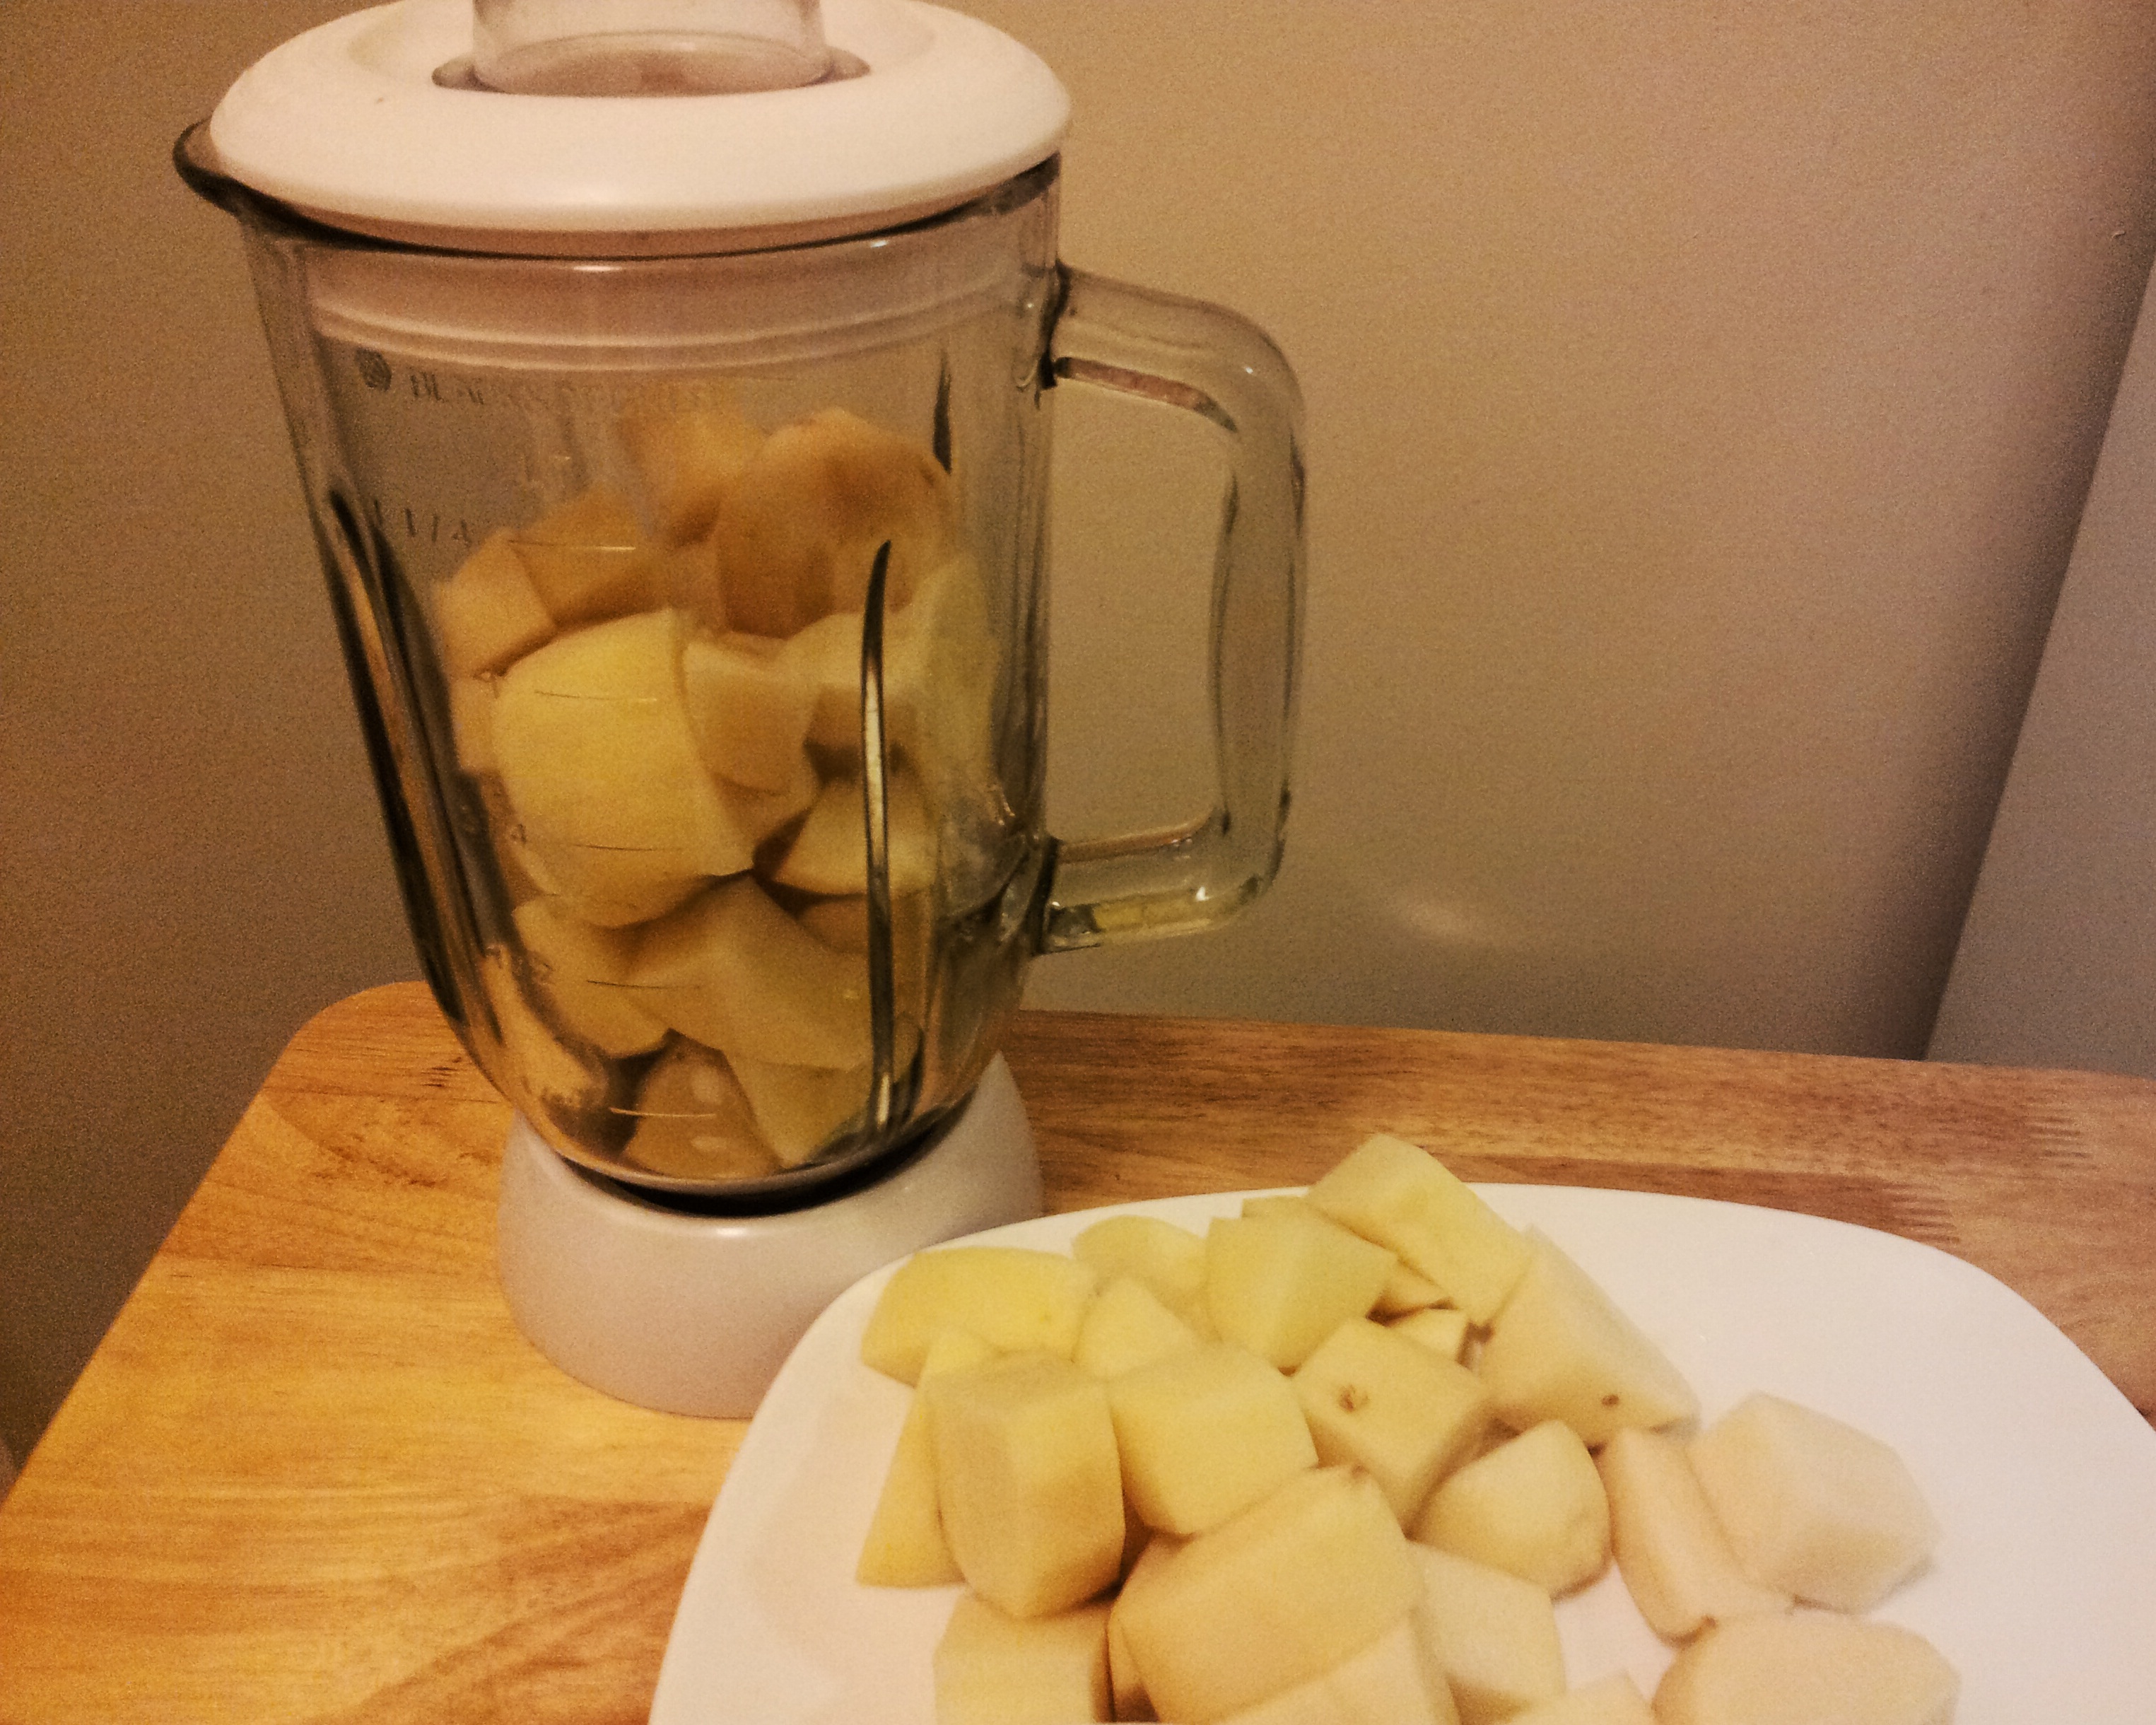 How to Grate Potatoes in a Blender